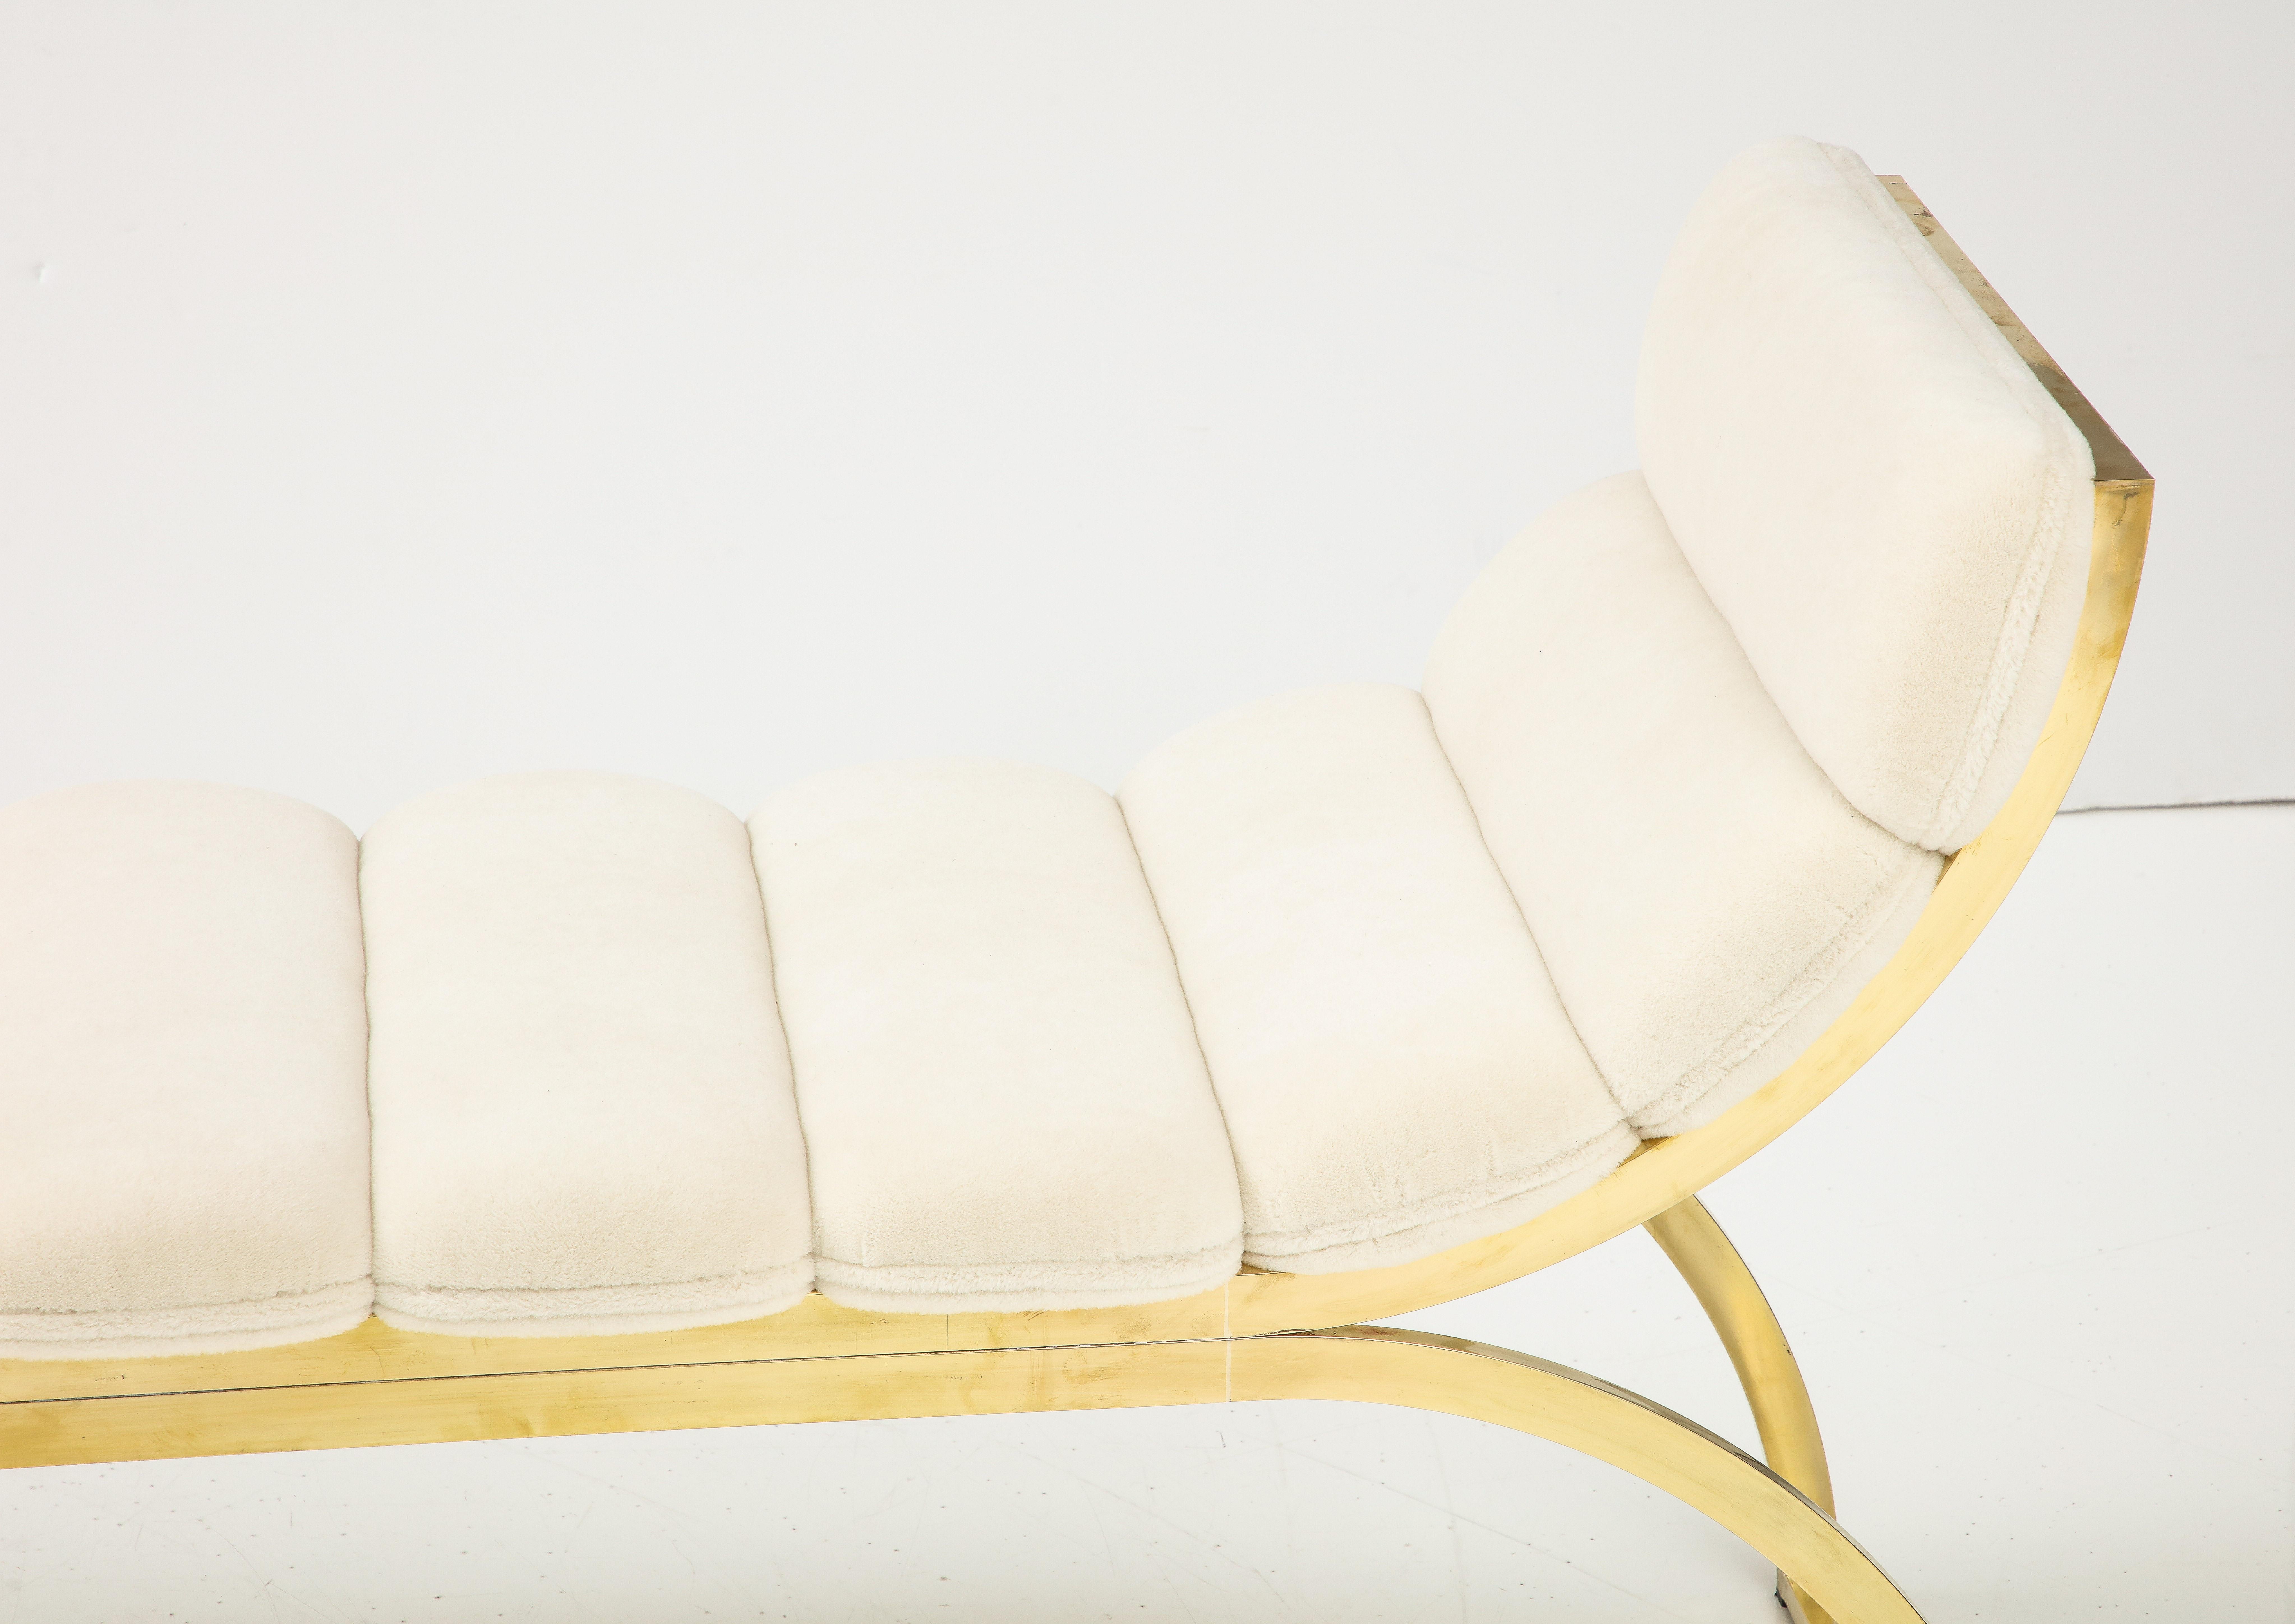 Bespoke Curved Polished Brass Bench consisting of two inverted U-shaped polished brass frames. Minimalistic design. Upholstered in a segmented cushion form with imported Bisson Bruneel boucle in ivory hue. Handmade in Italy. This bench is on display